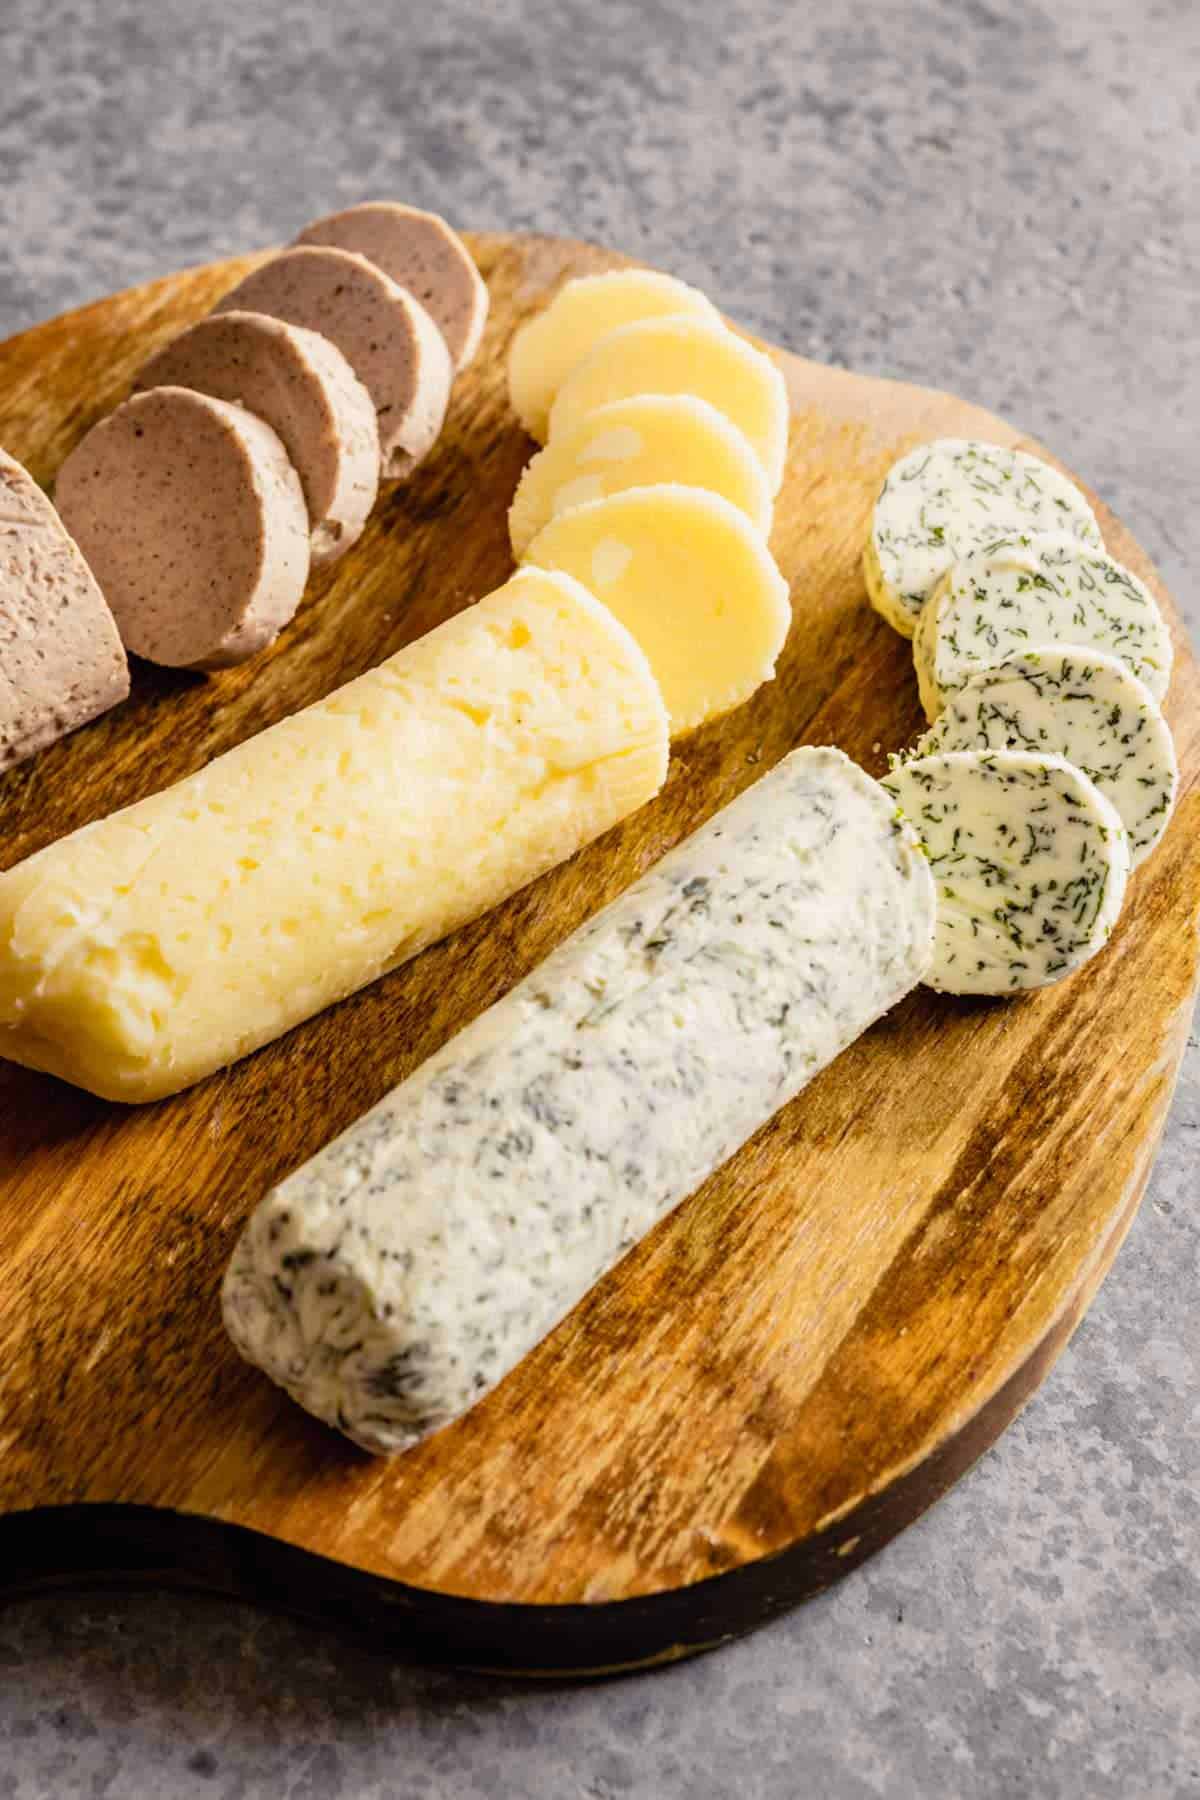 A wooden cutting board topped with three types of compound butter sliced into circles.